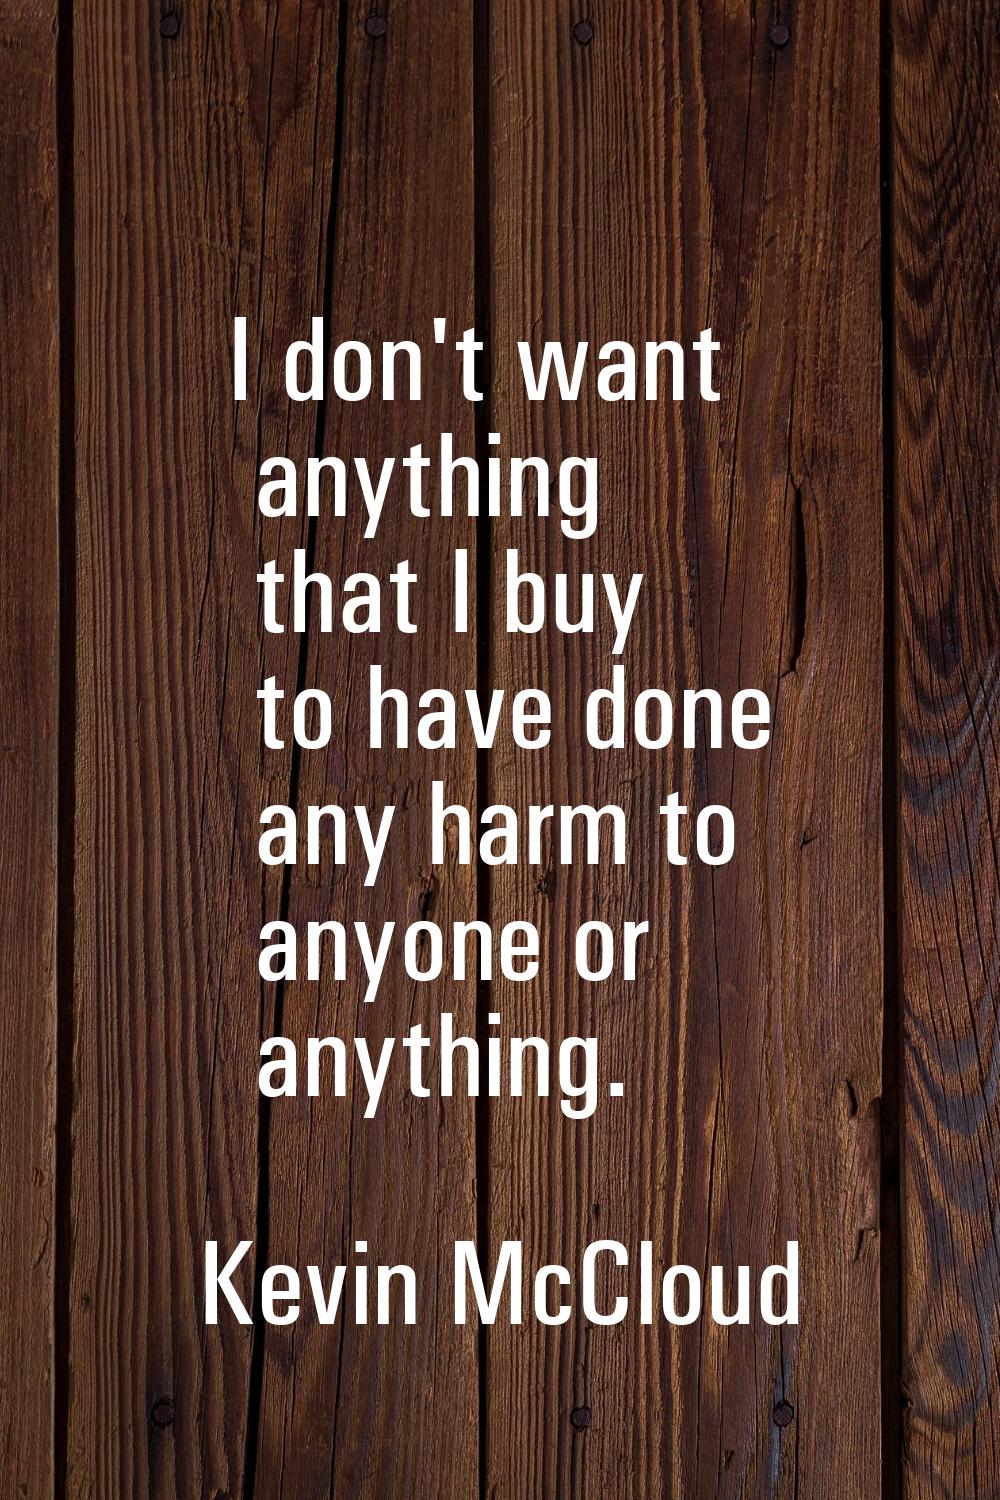 I don't want anything that I buy to have done any harm to anyone or anything.